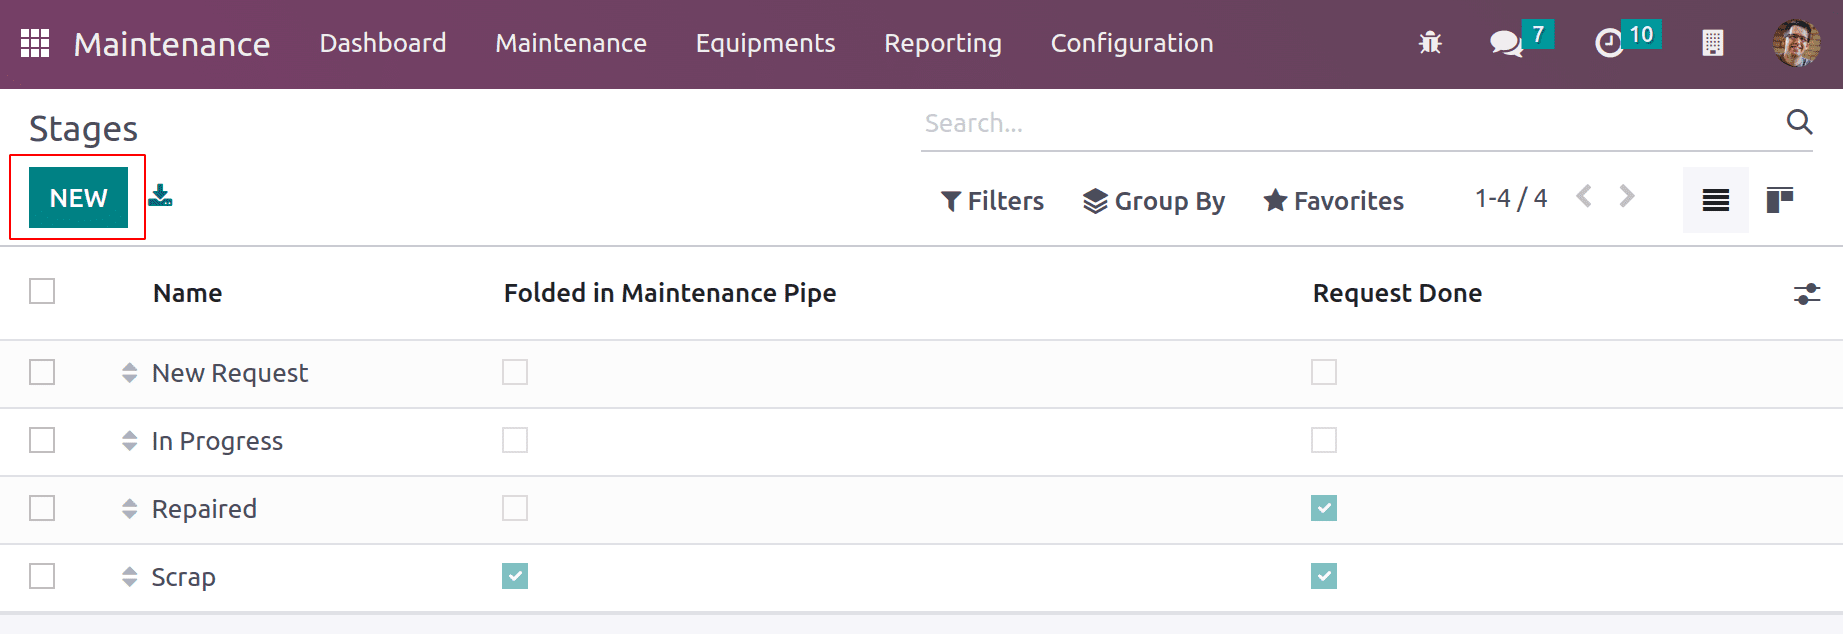 How to Maintain Equipment with Odoo 16 Maintenance App-cybrosys